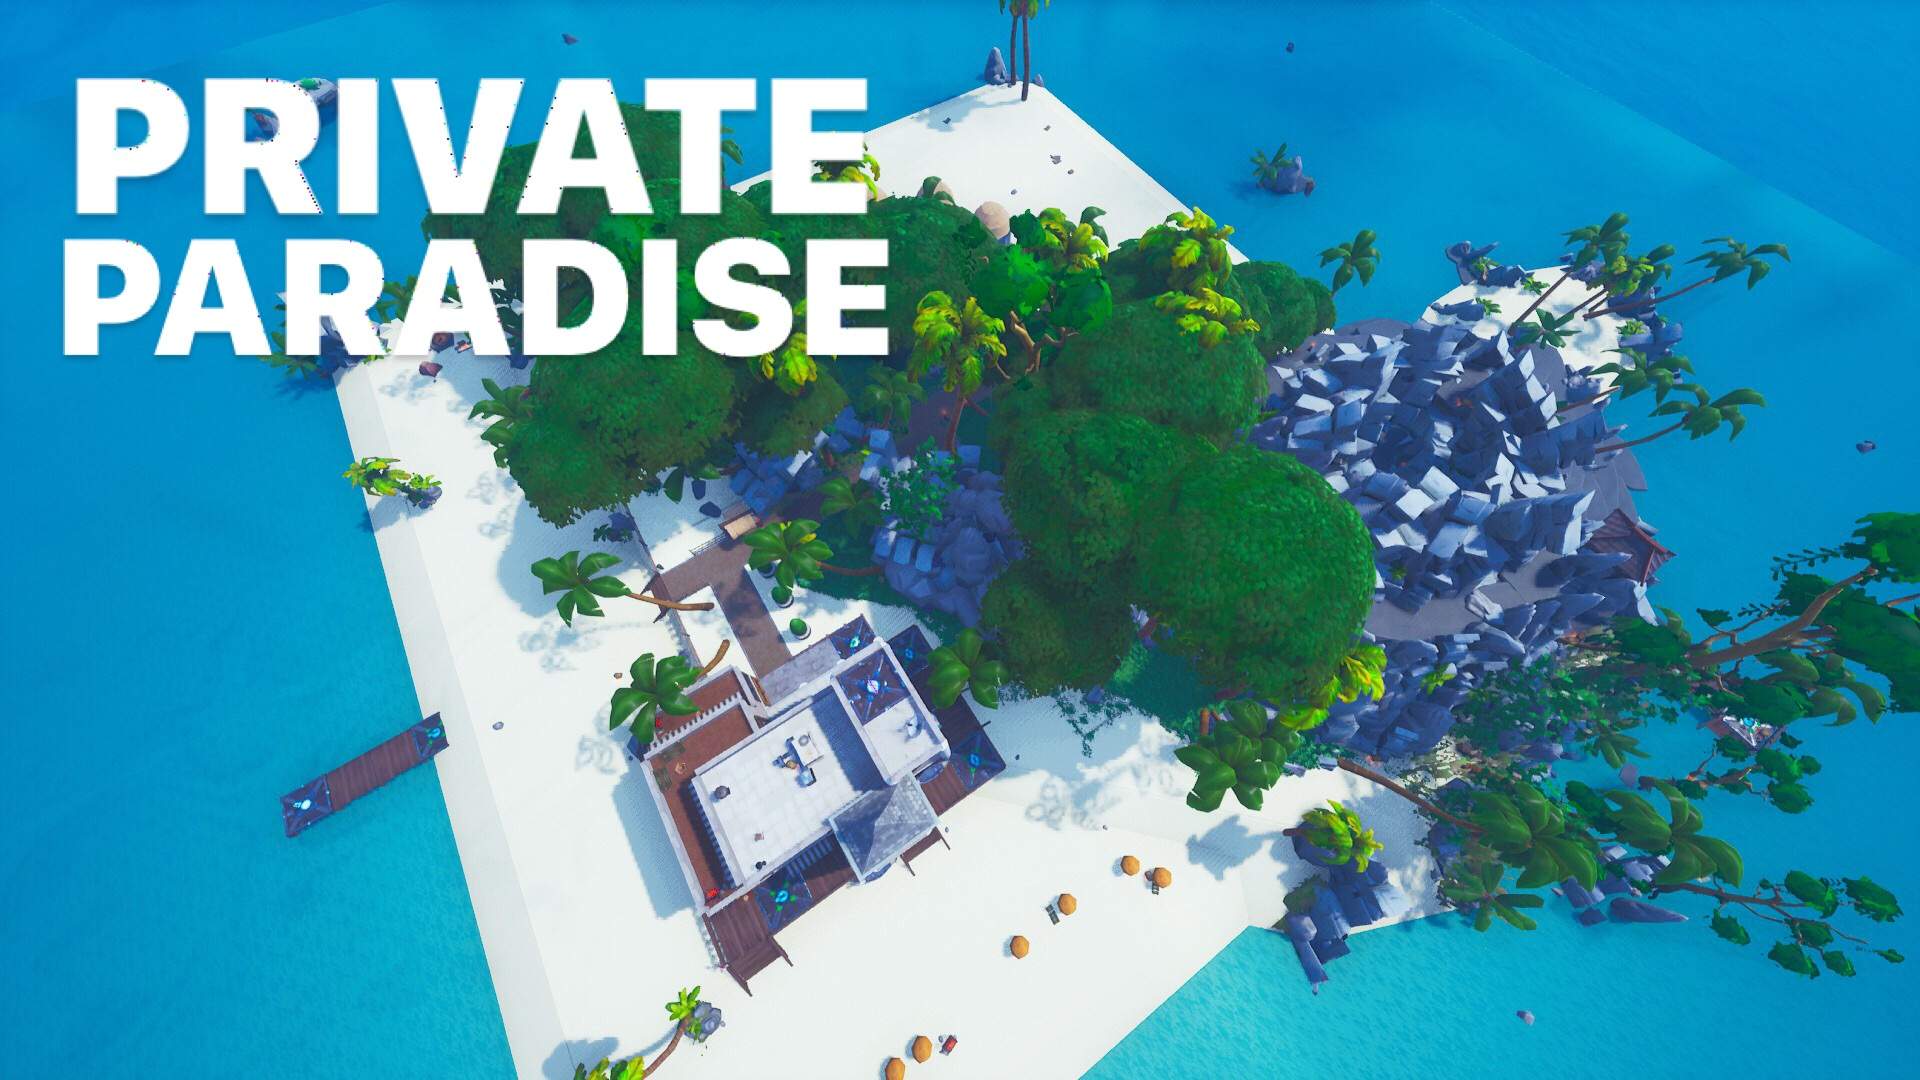 PRIVATE PARADISE (FREE-FOR-ALL)